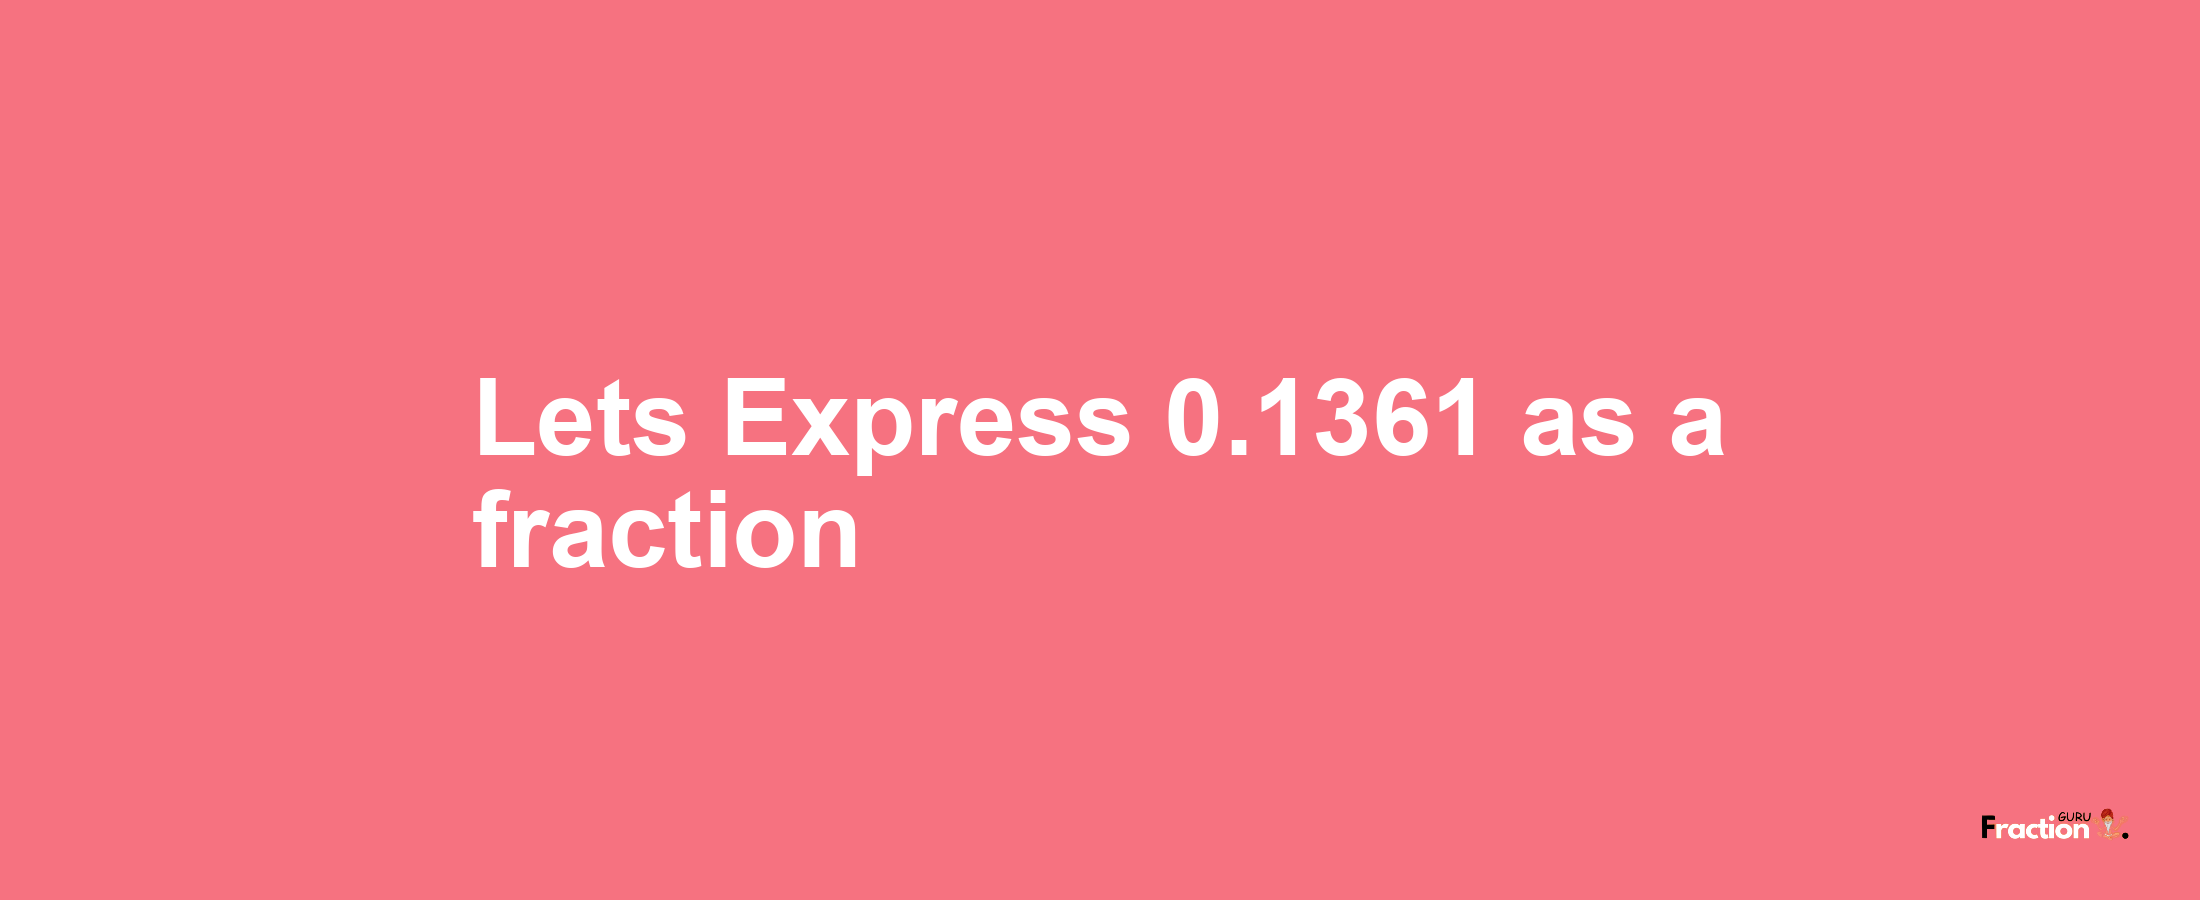 Lets Express 0.1361 as afraction